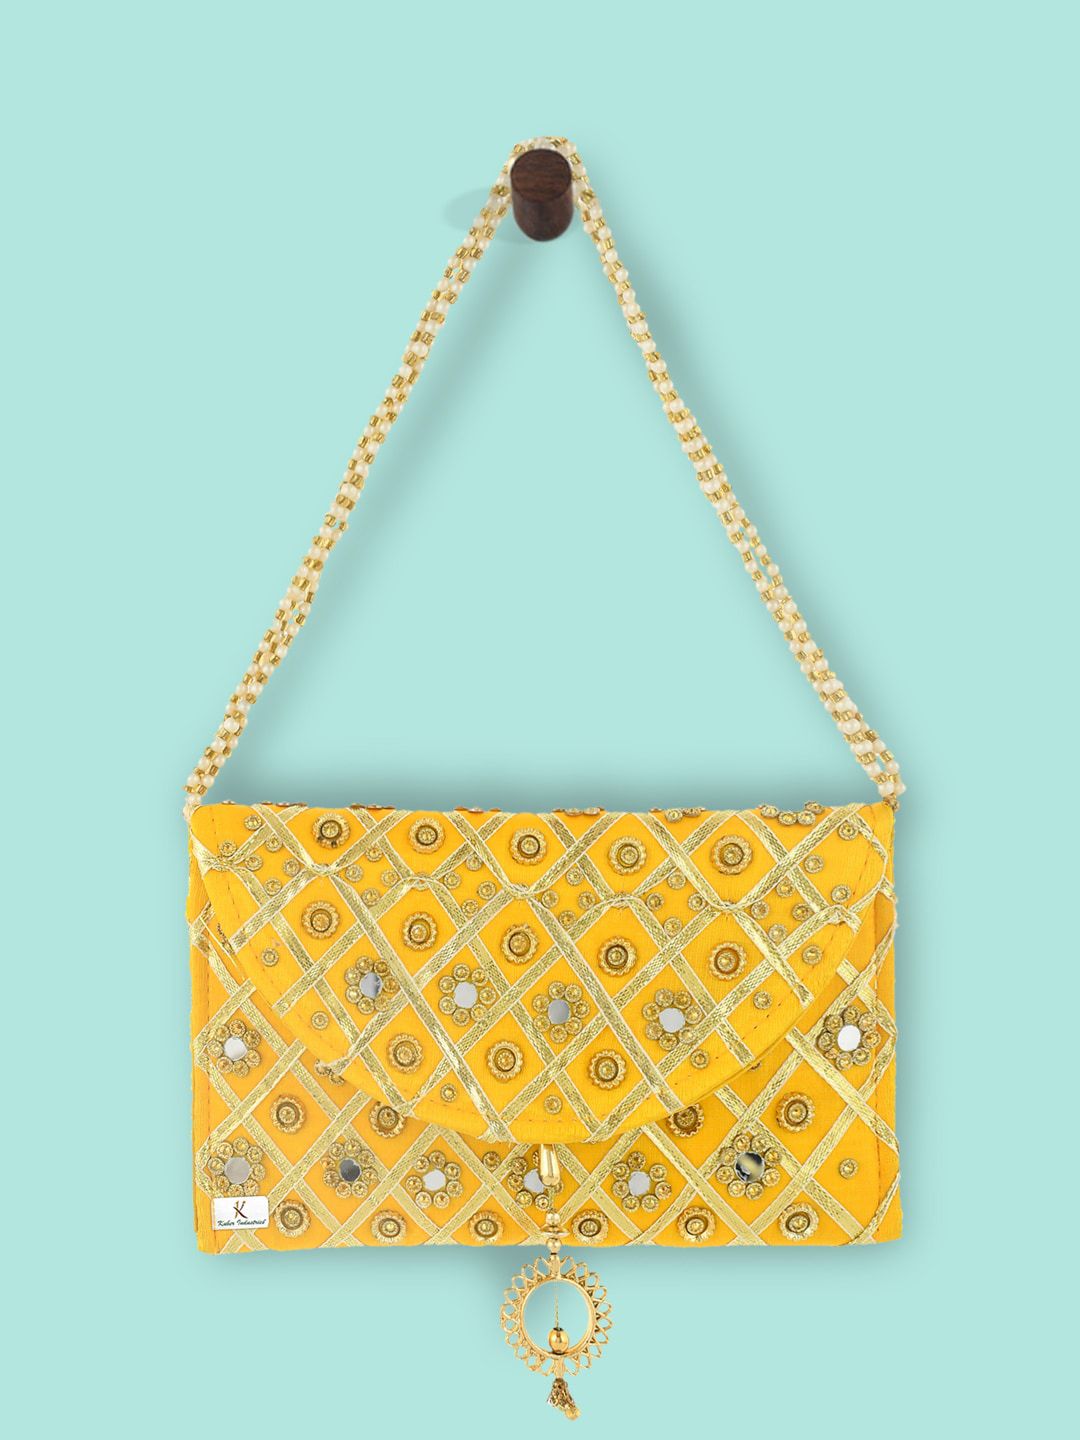 Kuber Industries Gold-Toned Embellished Sling Bag Price in India